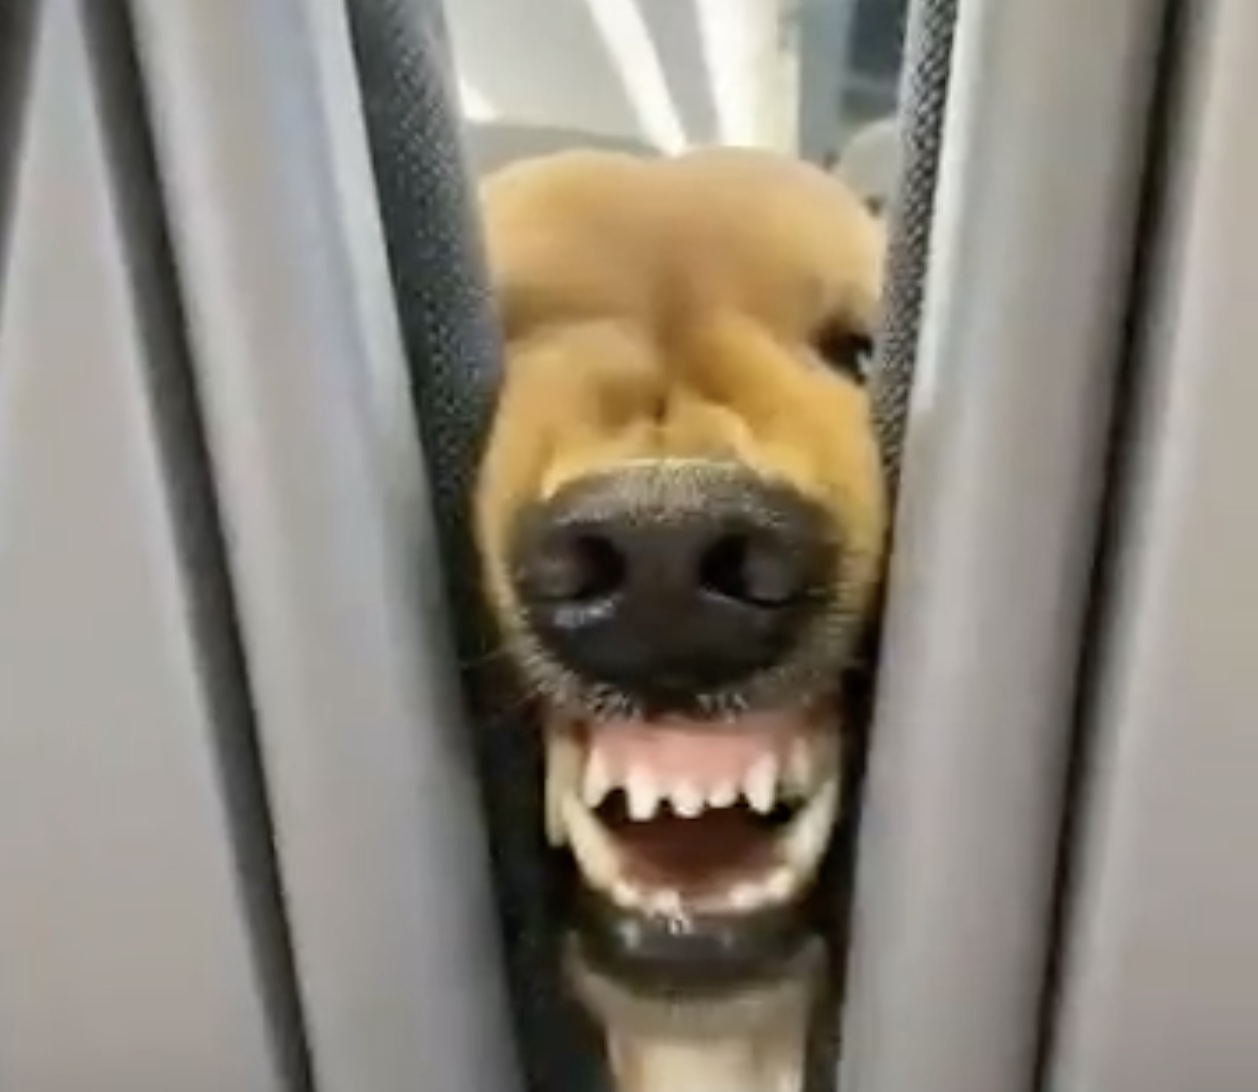 a dog with its mouth open